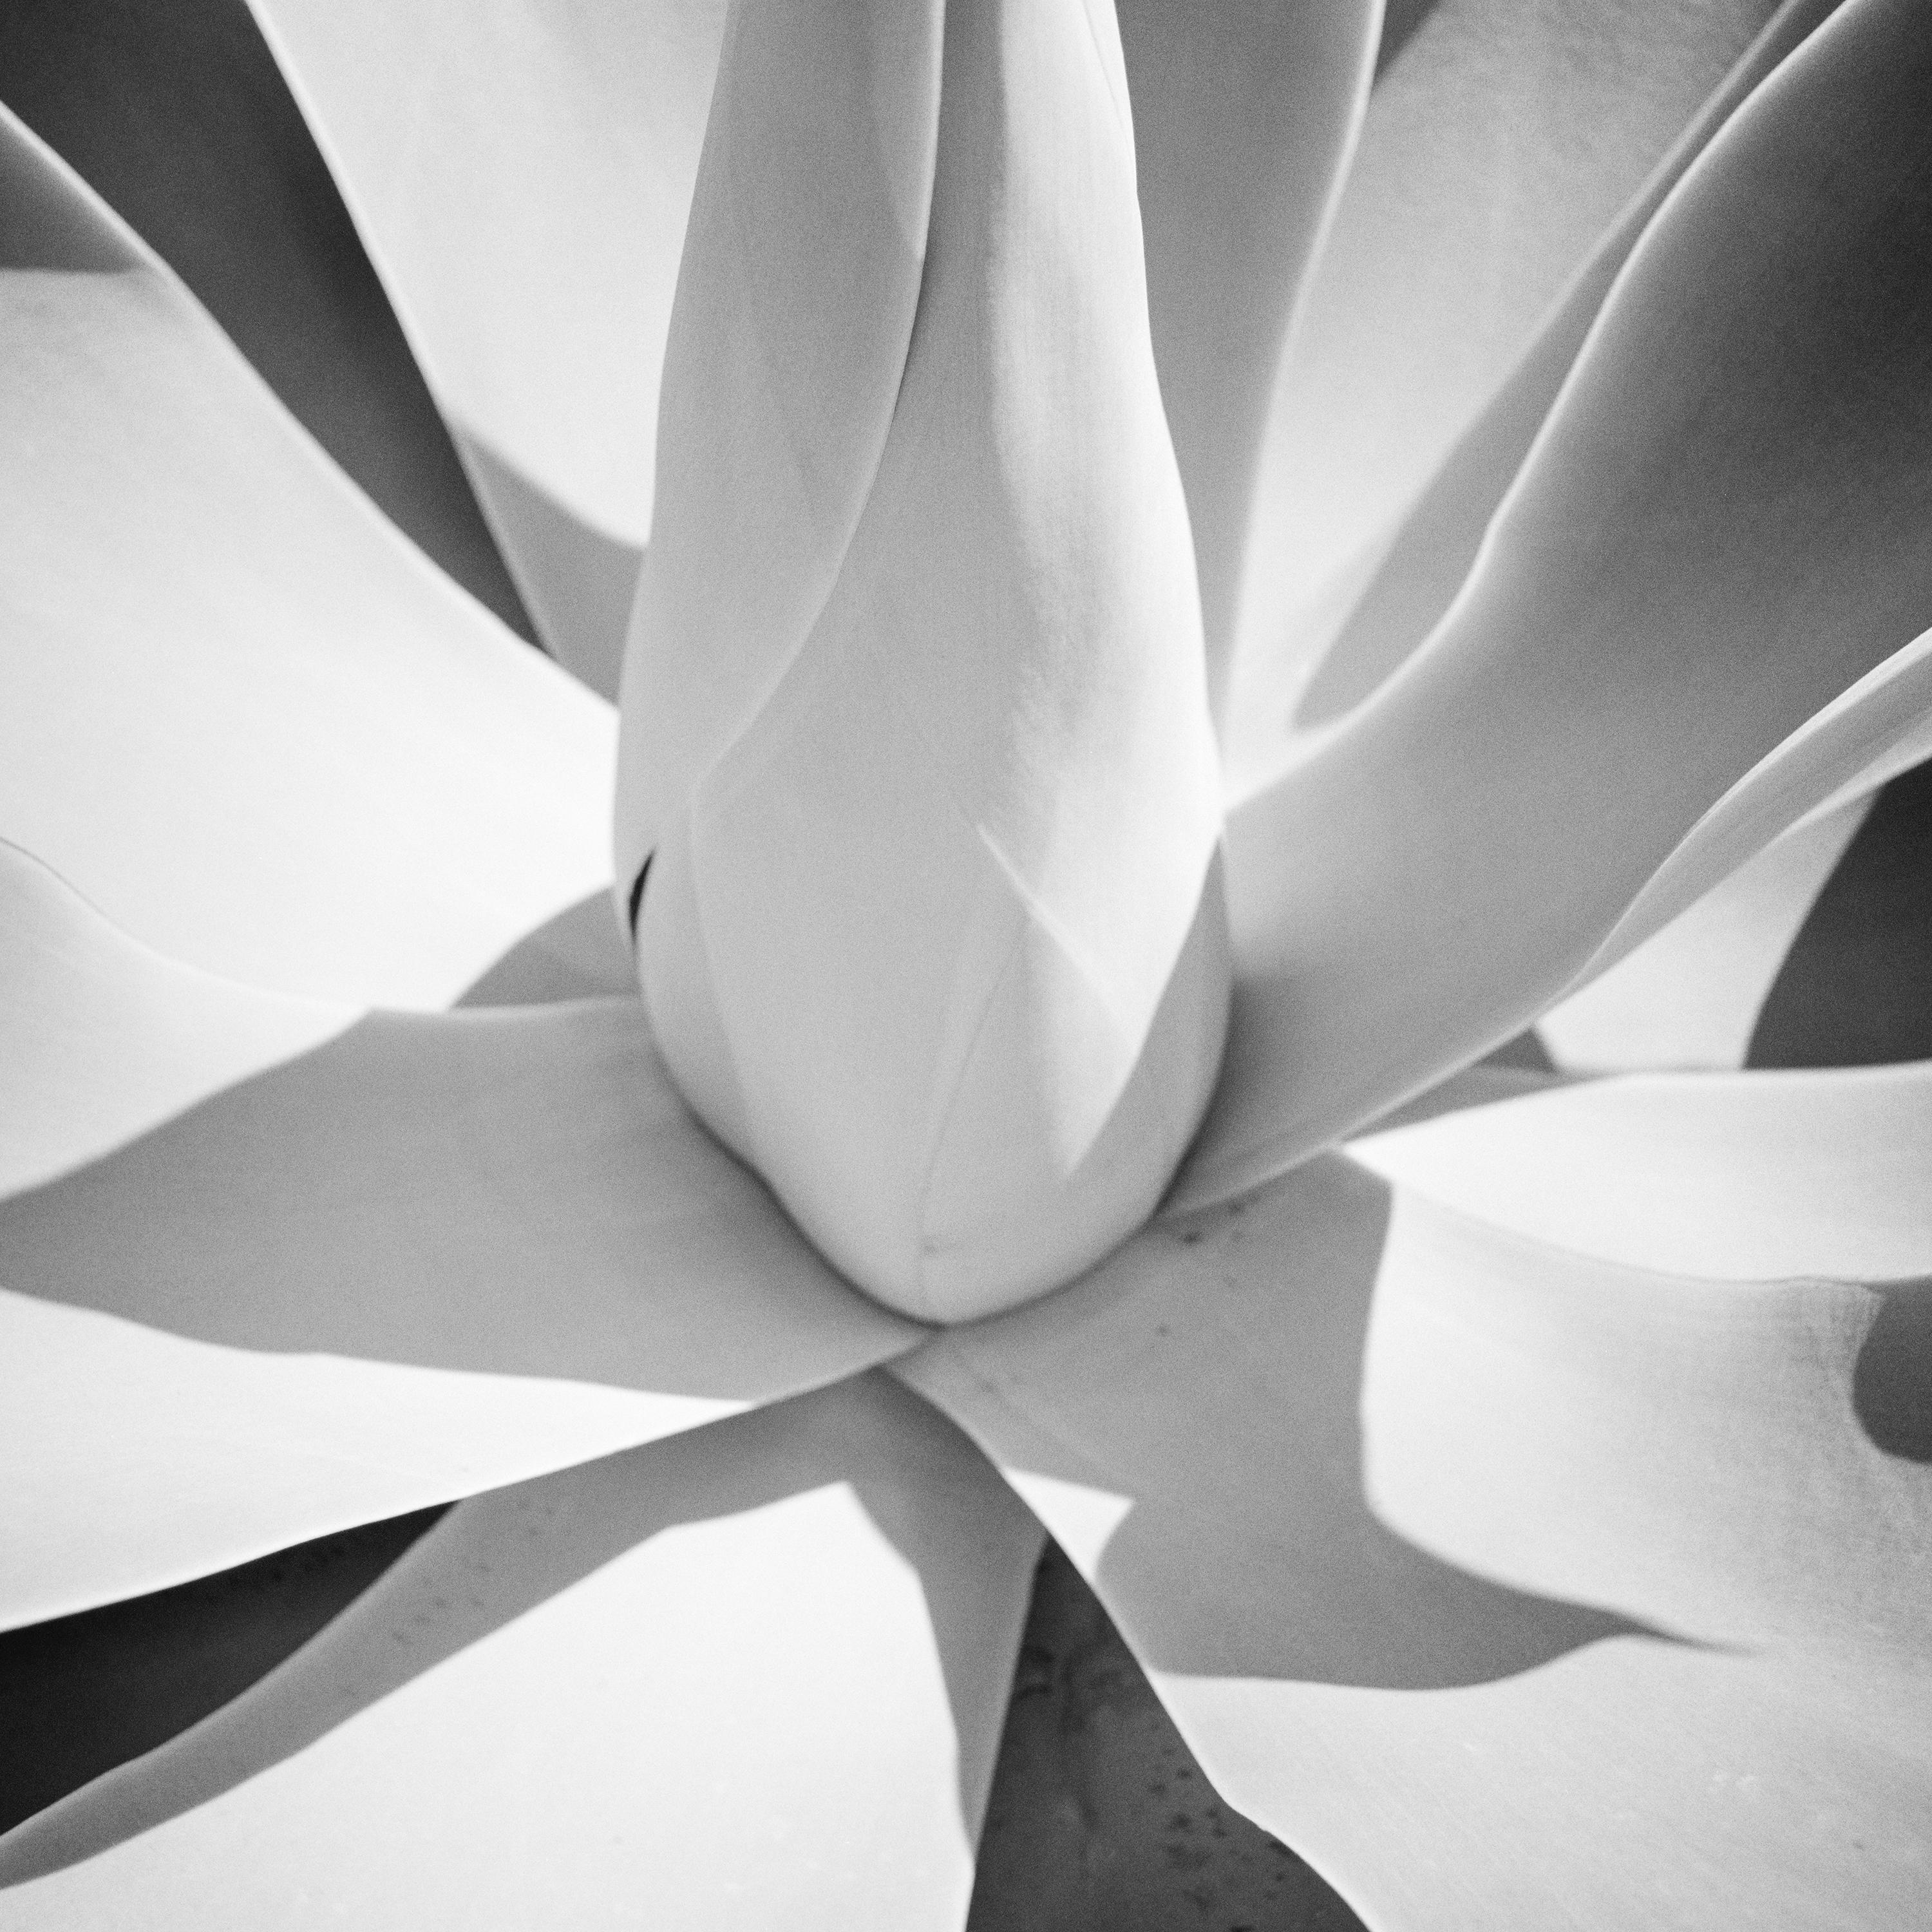 Black and White Fine Art landscape photography. Blue Agave, plant, detail, Arizona, USA. Archival pigment ink print, edition of 9. Signed, titled, dated and numbered by artist. Certificate of authenticity included. Printed with 4cm white